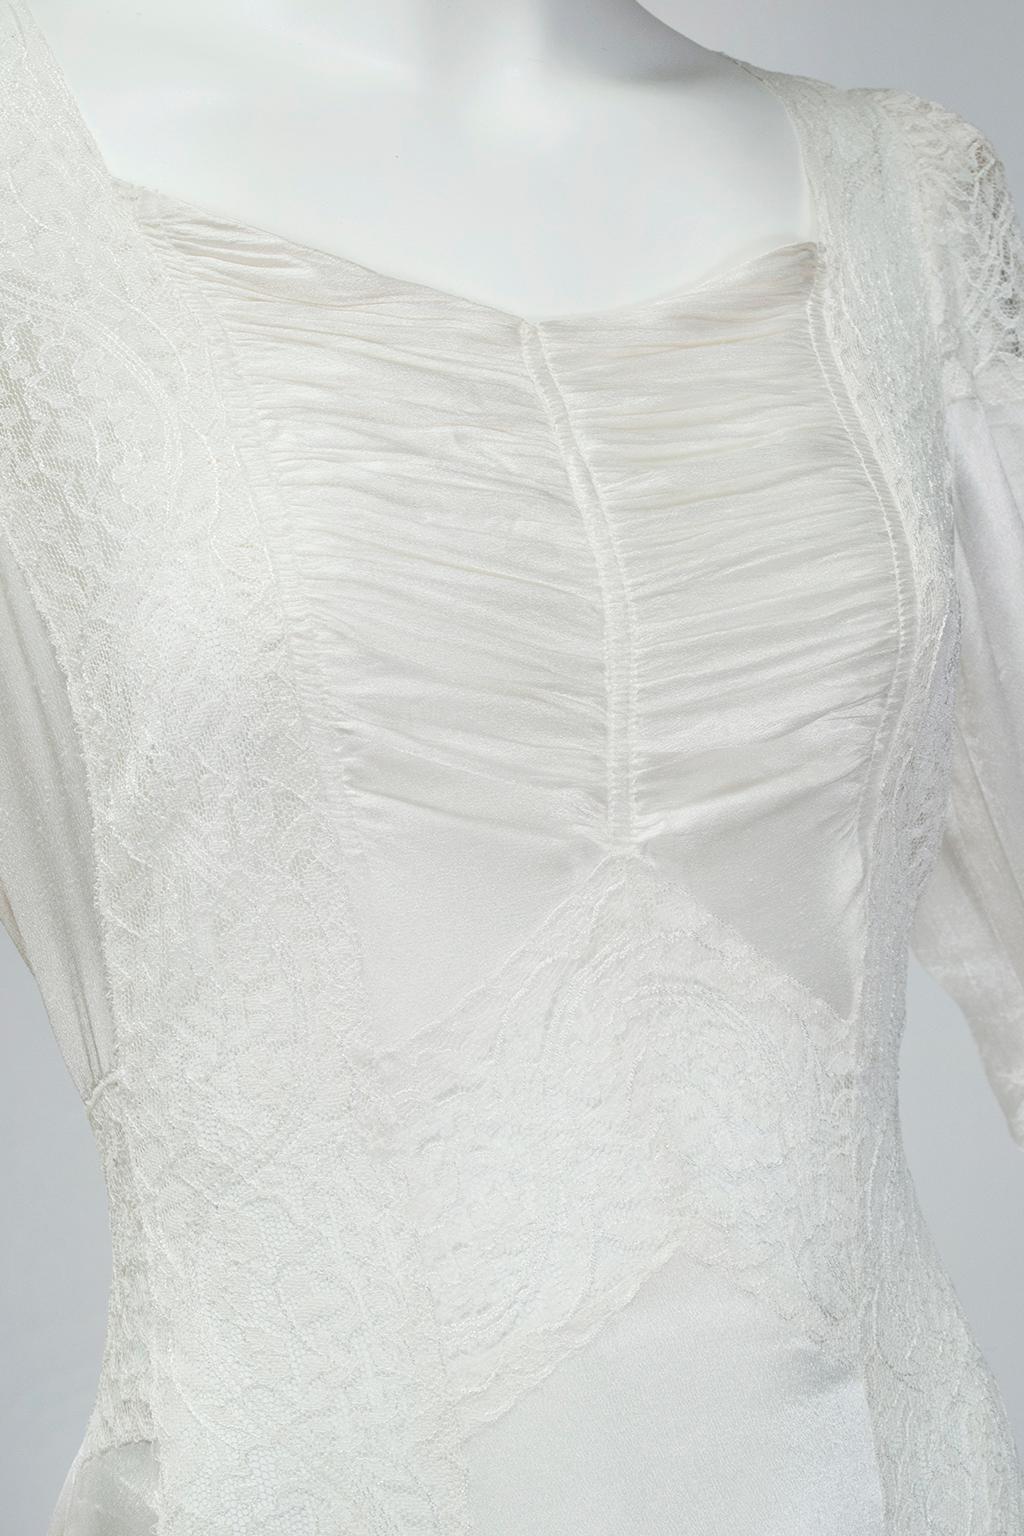 Nearly Naked White Satin Deco Wedding Gown w Transparent Lace Panels - XS, 1930s For Sale 3